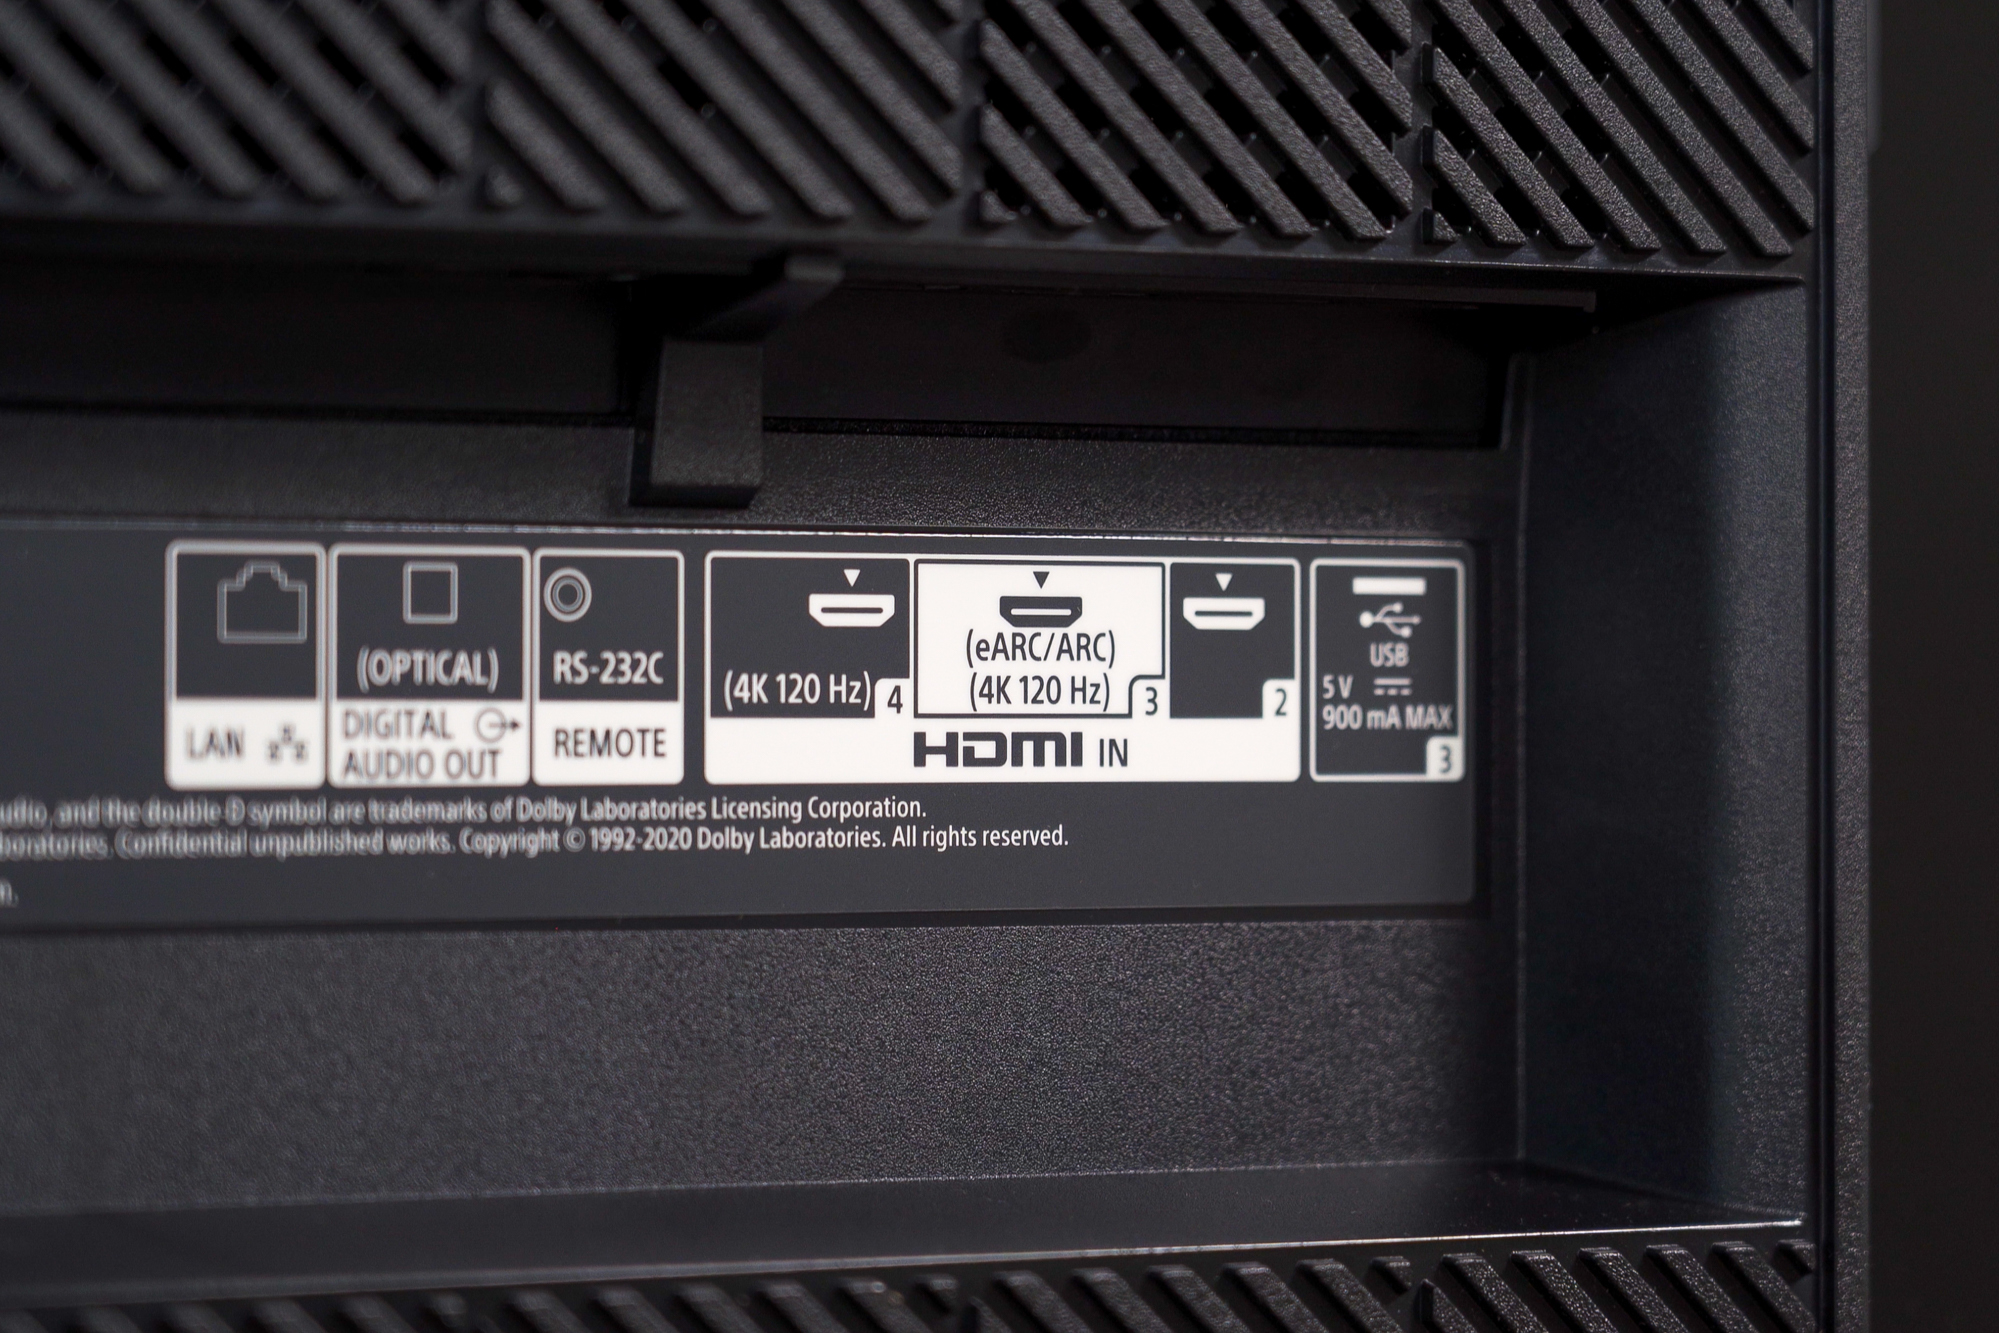 A close up image on the Sony A80J 4K HDR OLED TV's plugins and ports on the backside.